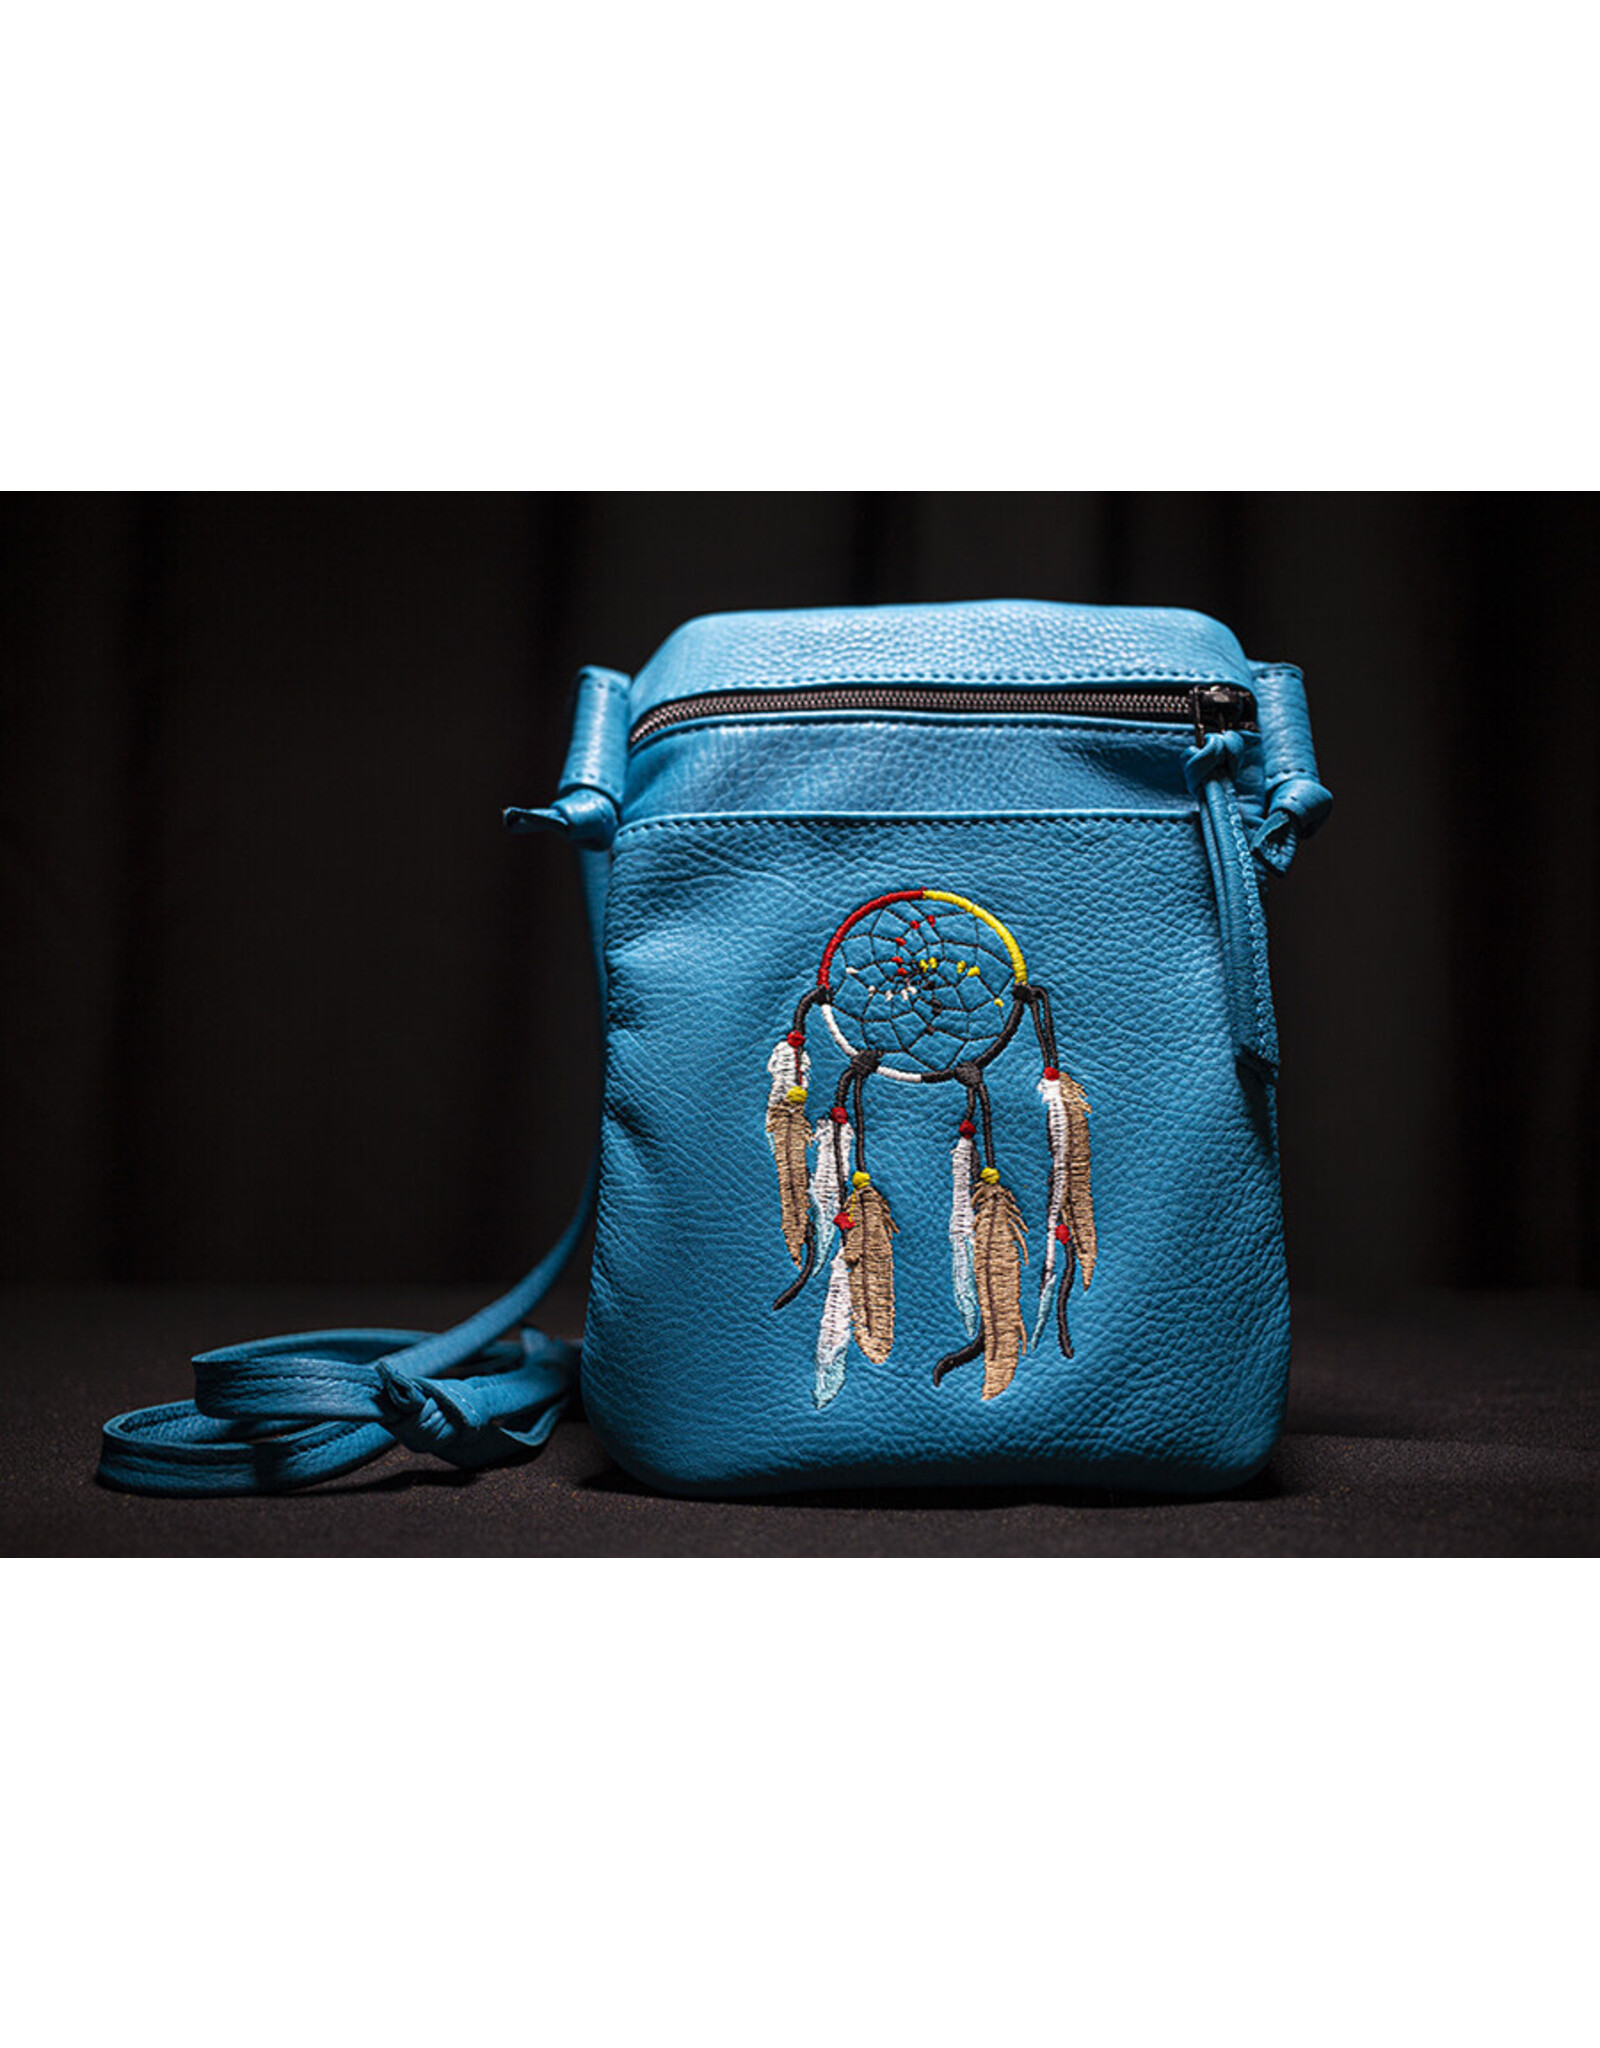 Deer Hide Purse with Dreamcatcher Embroidery